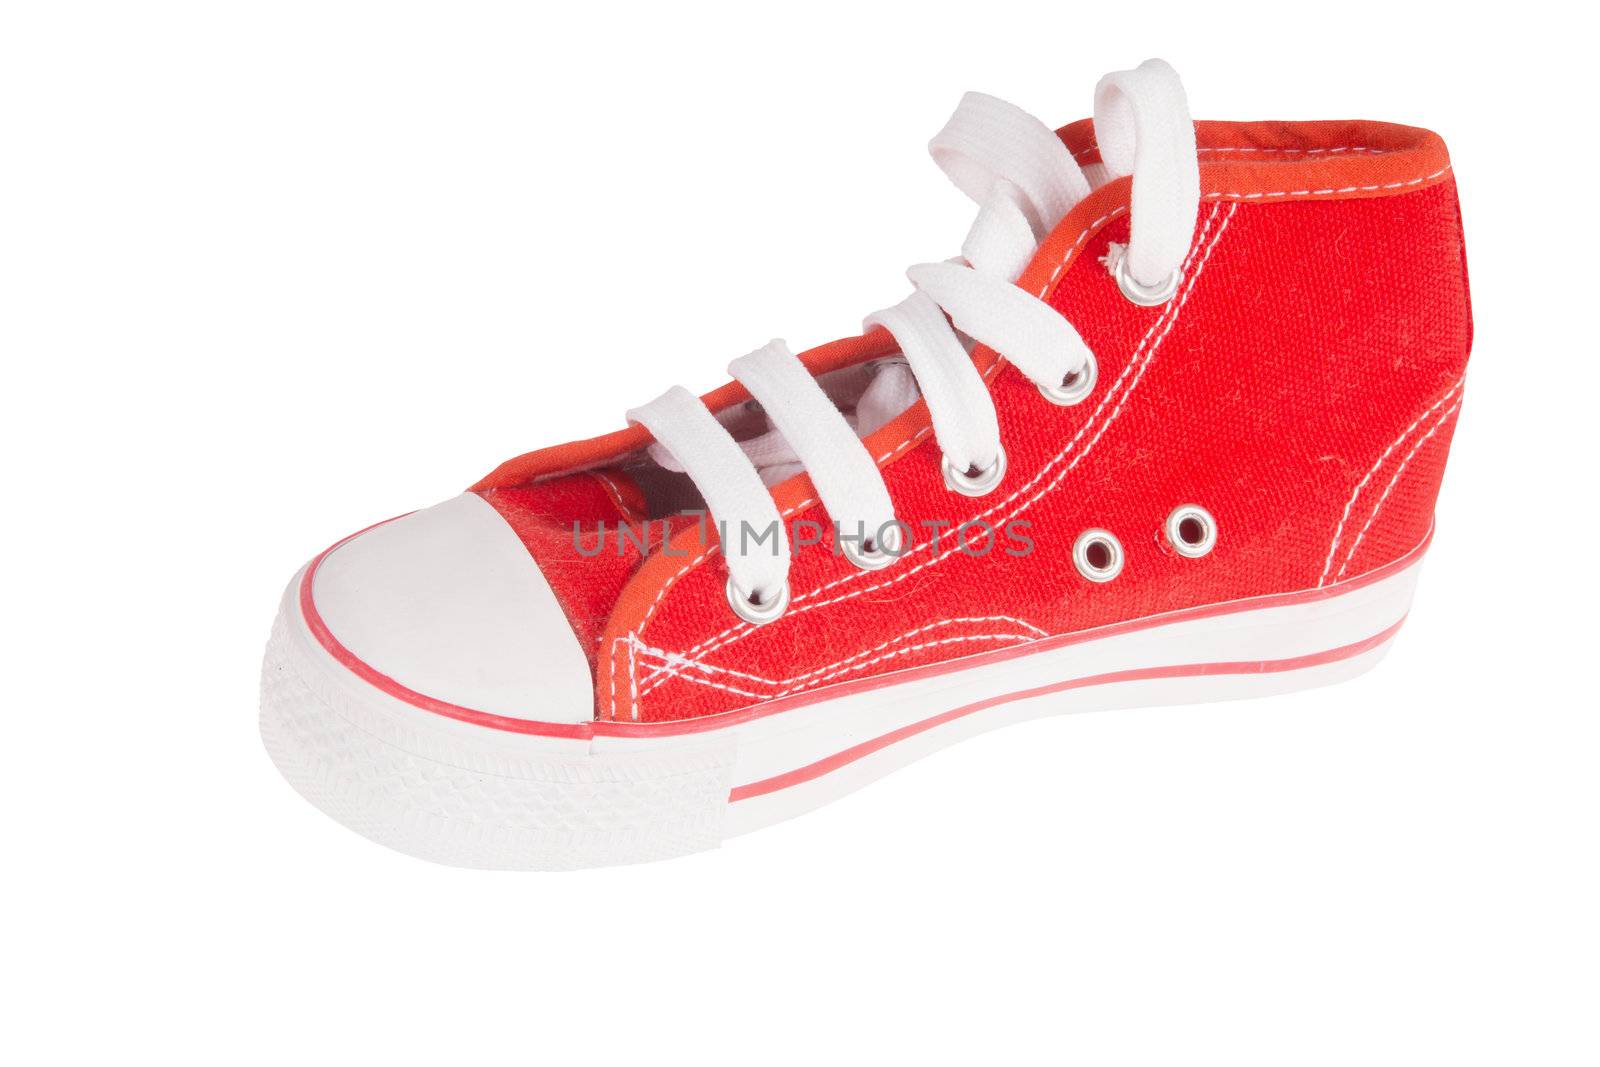 Red sneaker, isolated on background